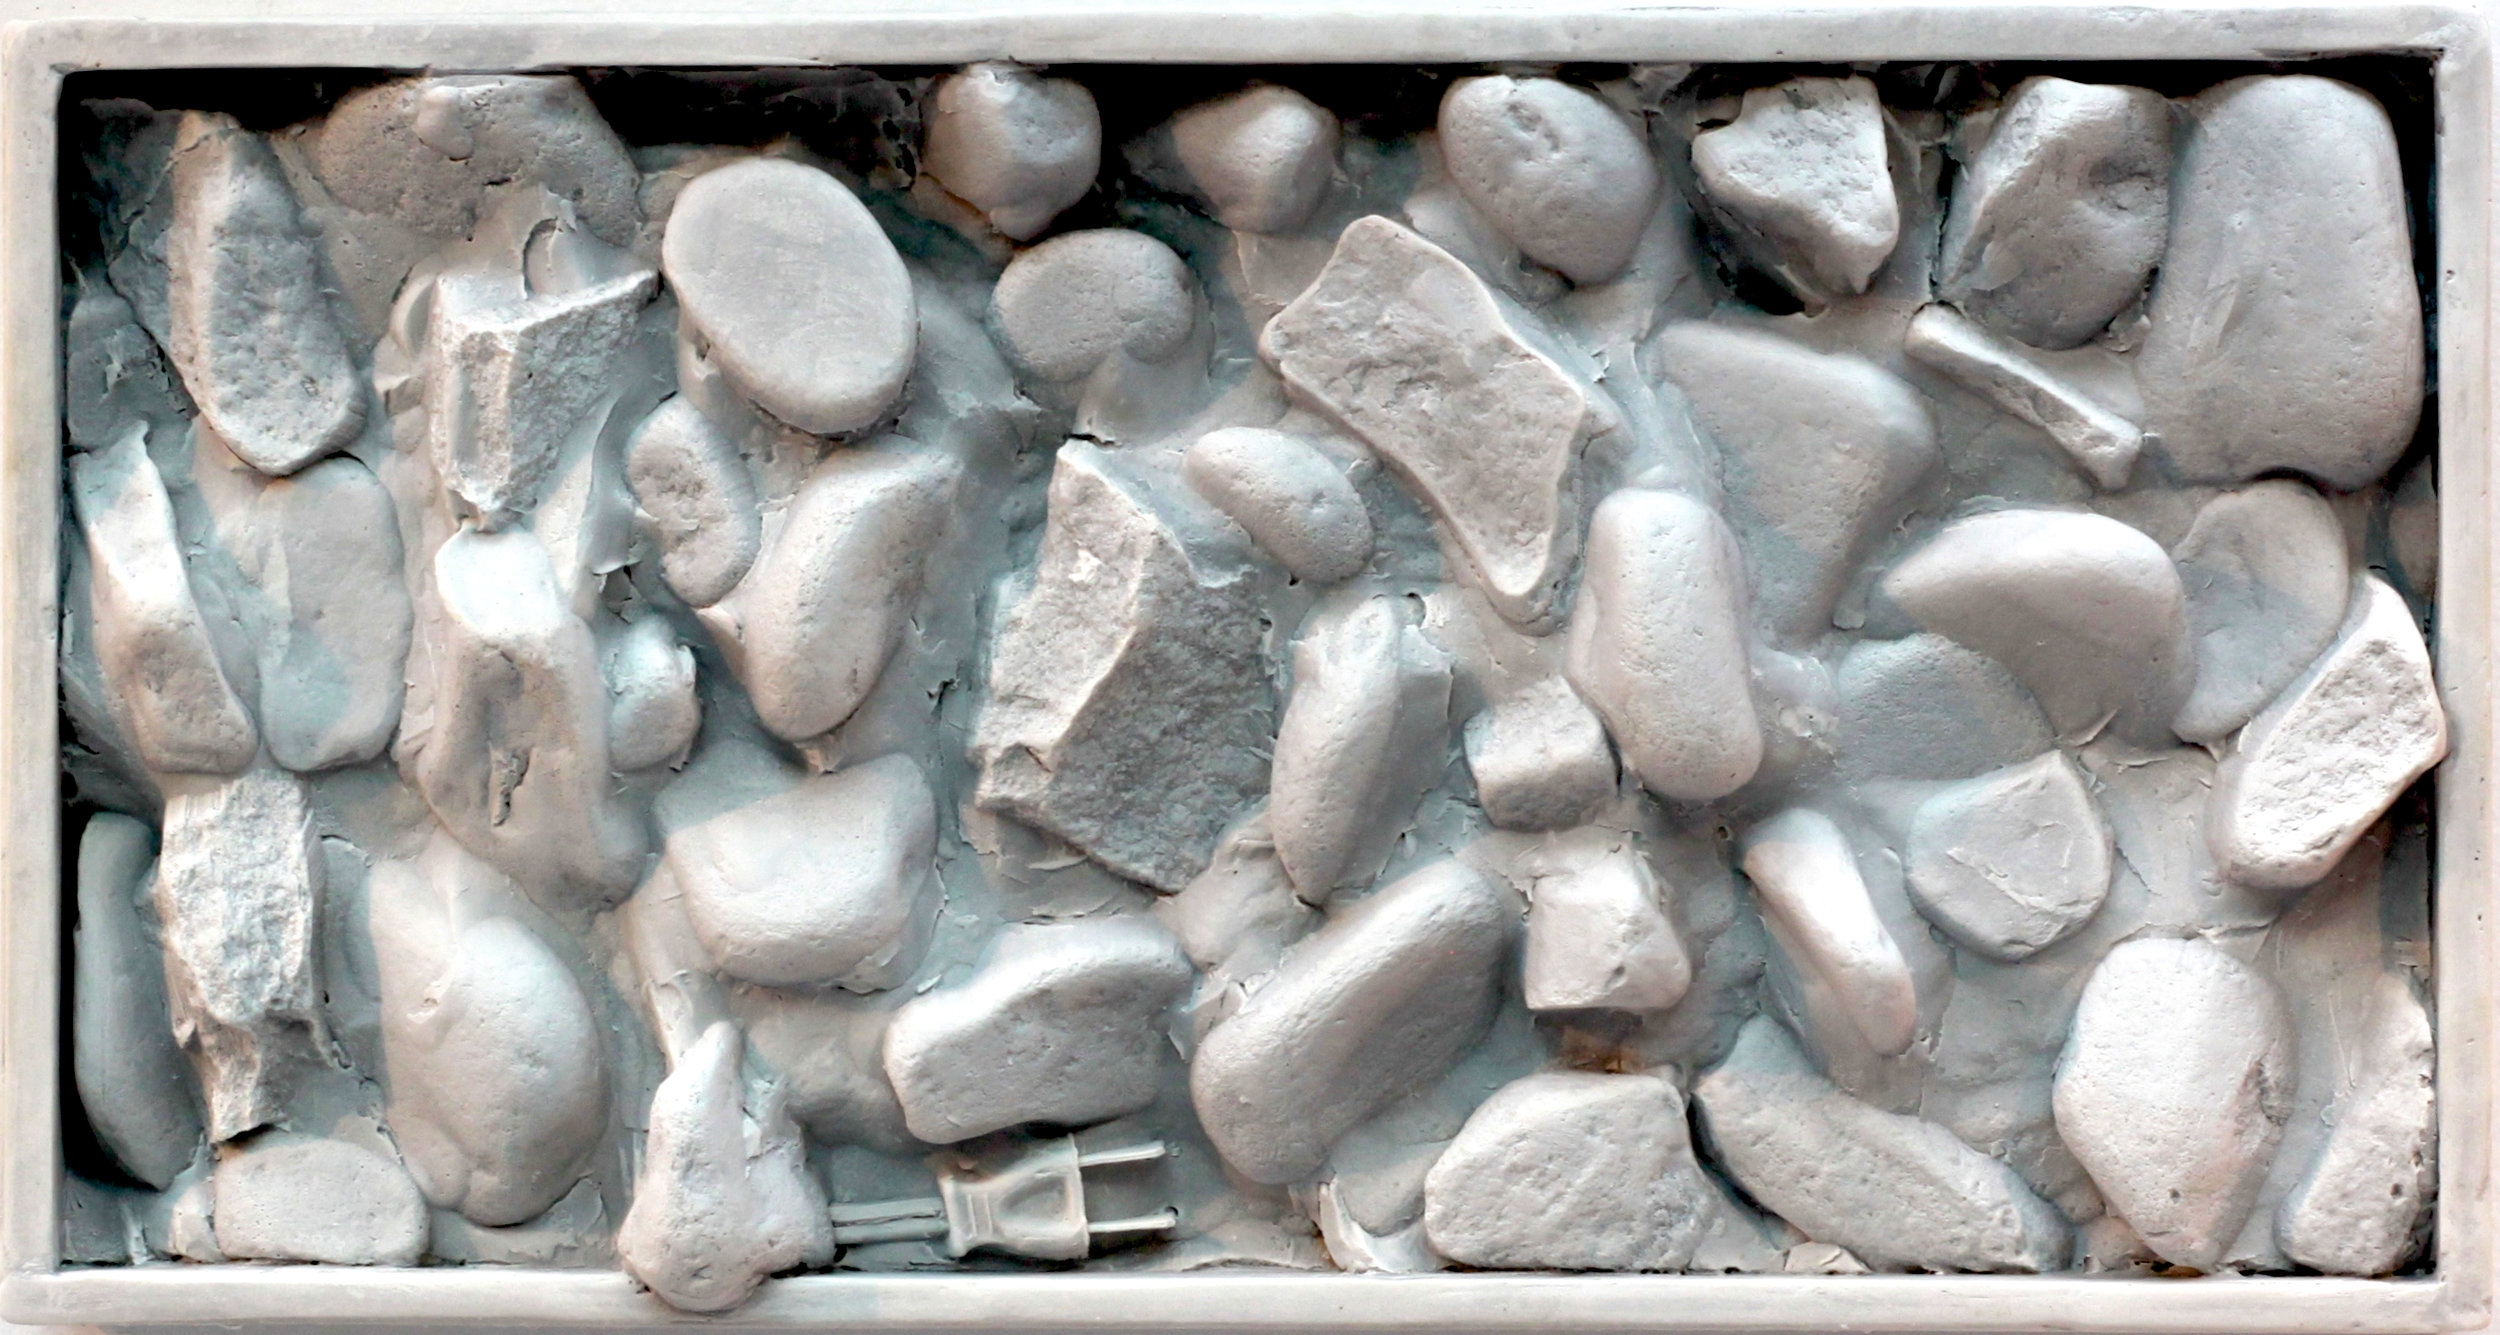  Cscape #54 Rocks (Study) with plug, 9" x 17" x 3", hydrocal and Carrara marble, 2017 